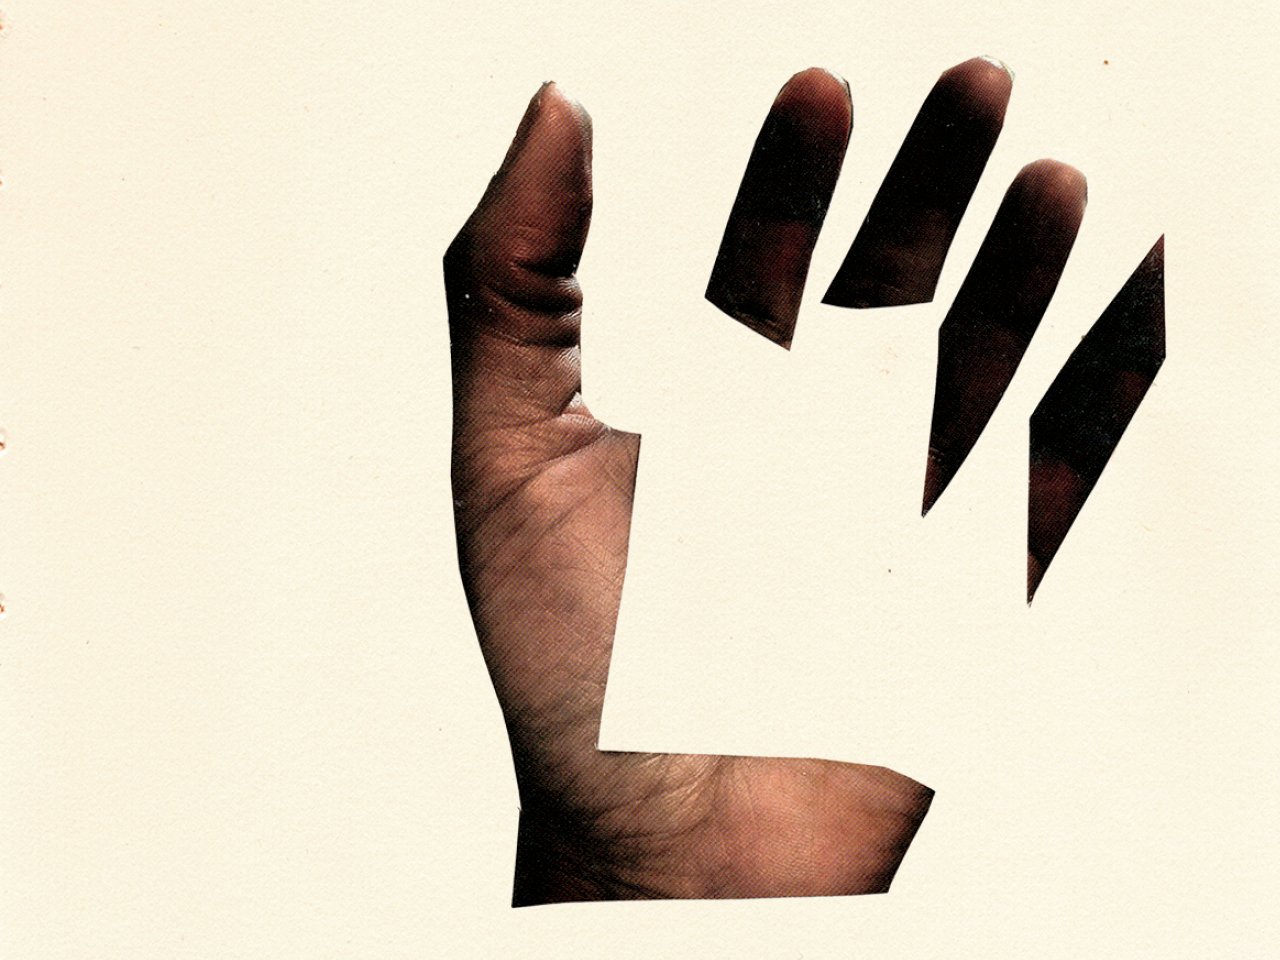 A photo illustration of a photo of a man's hand, cut out and arranged in pieces in the shape of a hand